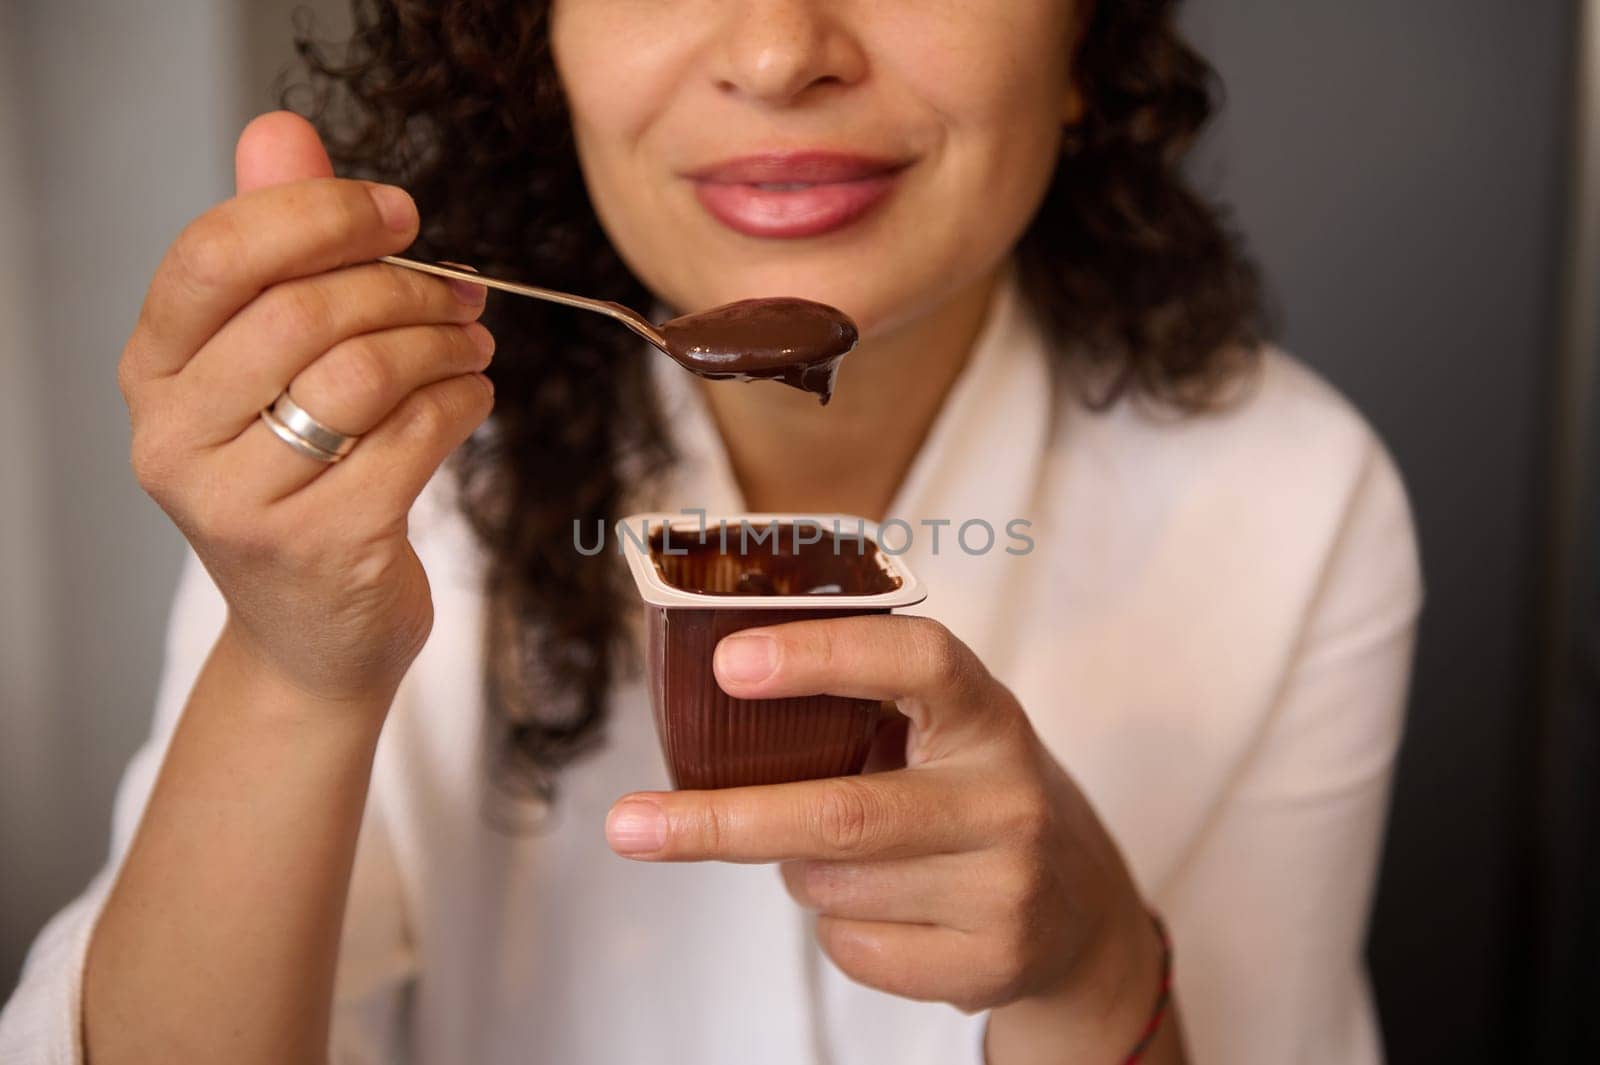 Close-up of a blurred young smiling woman eating delicious chocolate vegan yogurt for breakfast. Healthy eating and diet concept. Food and drink consumerism. by artgf